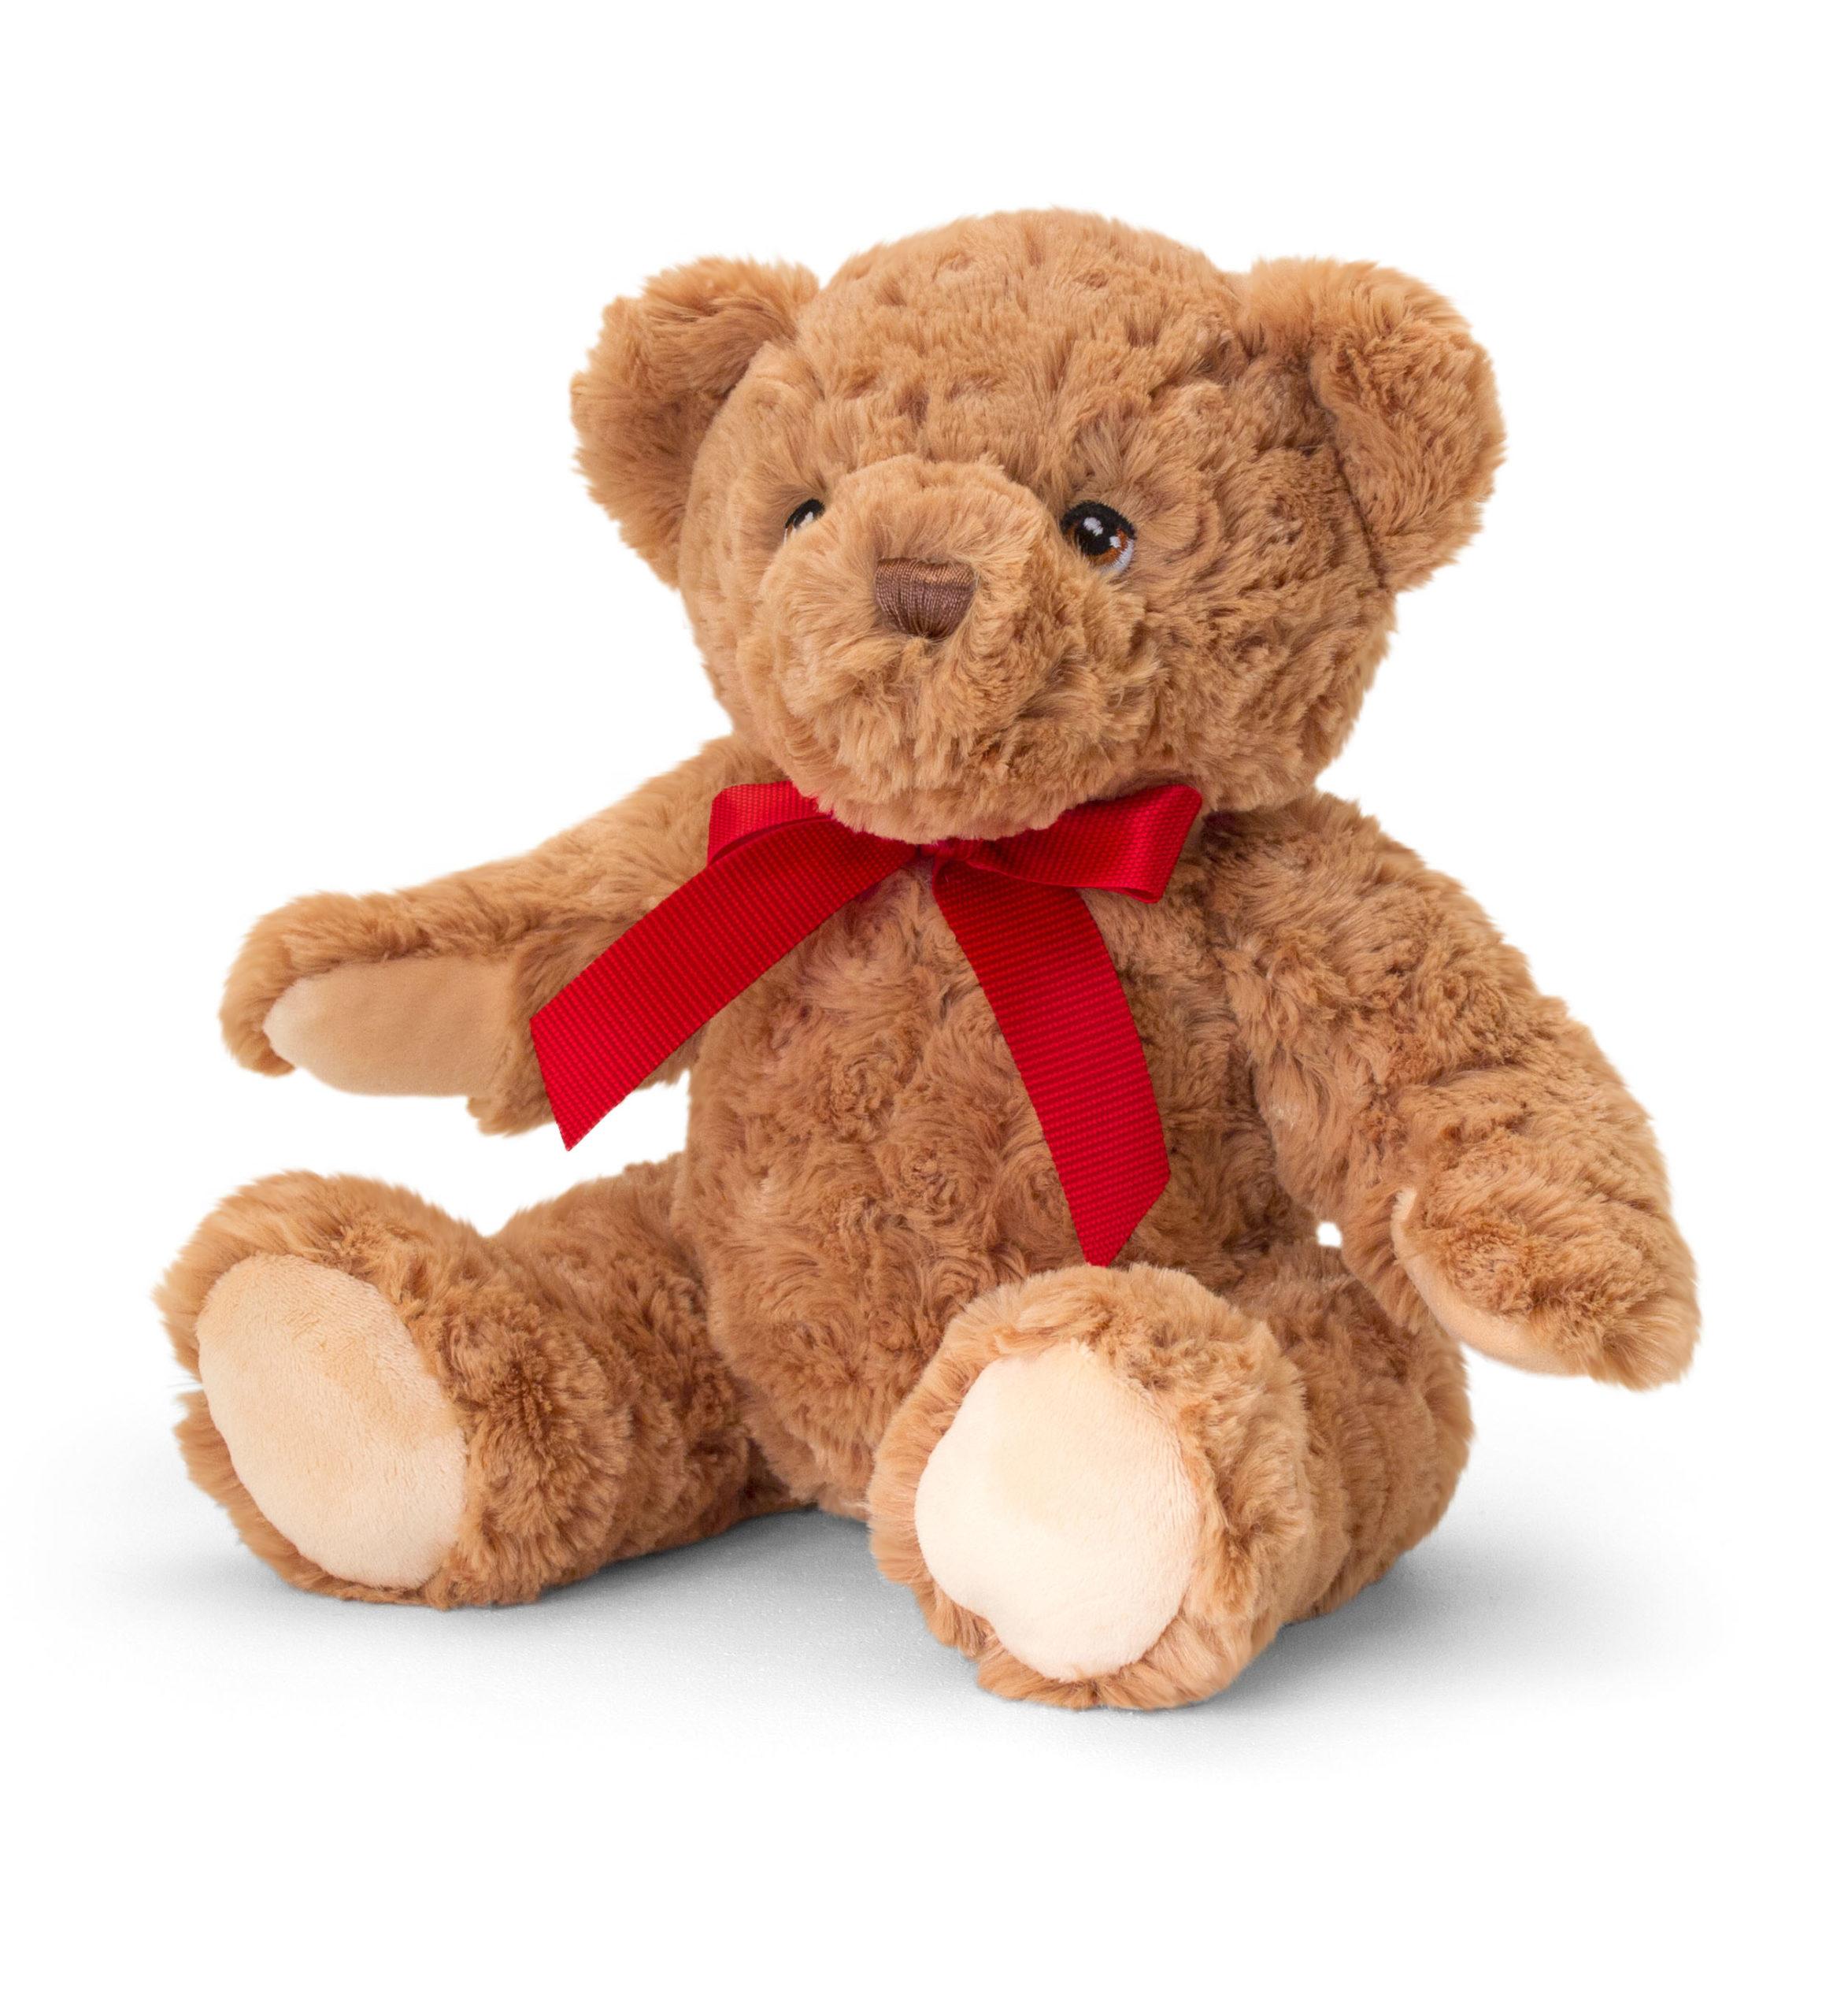 Brown, cuddly teddy with red bow around its neck.